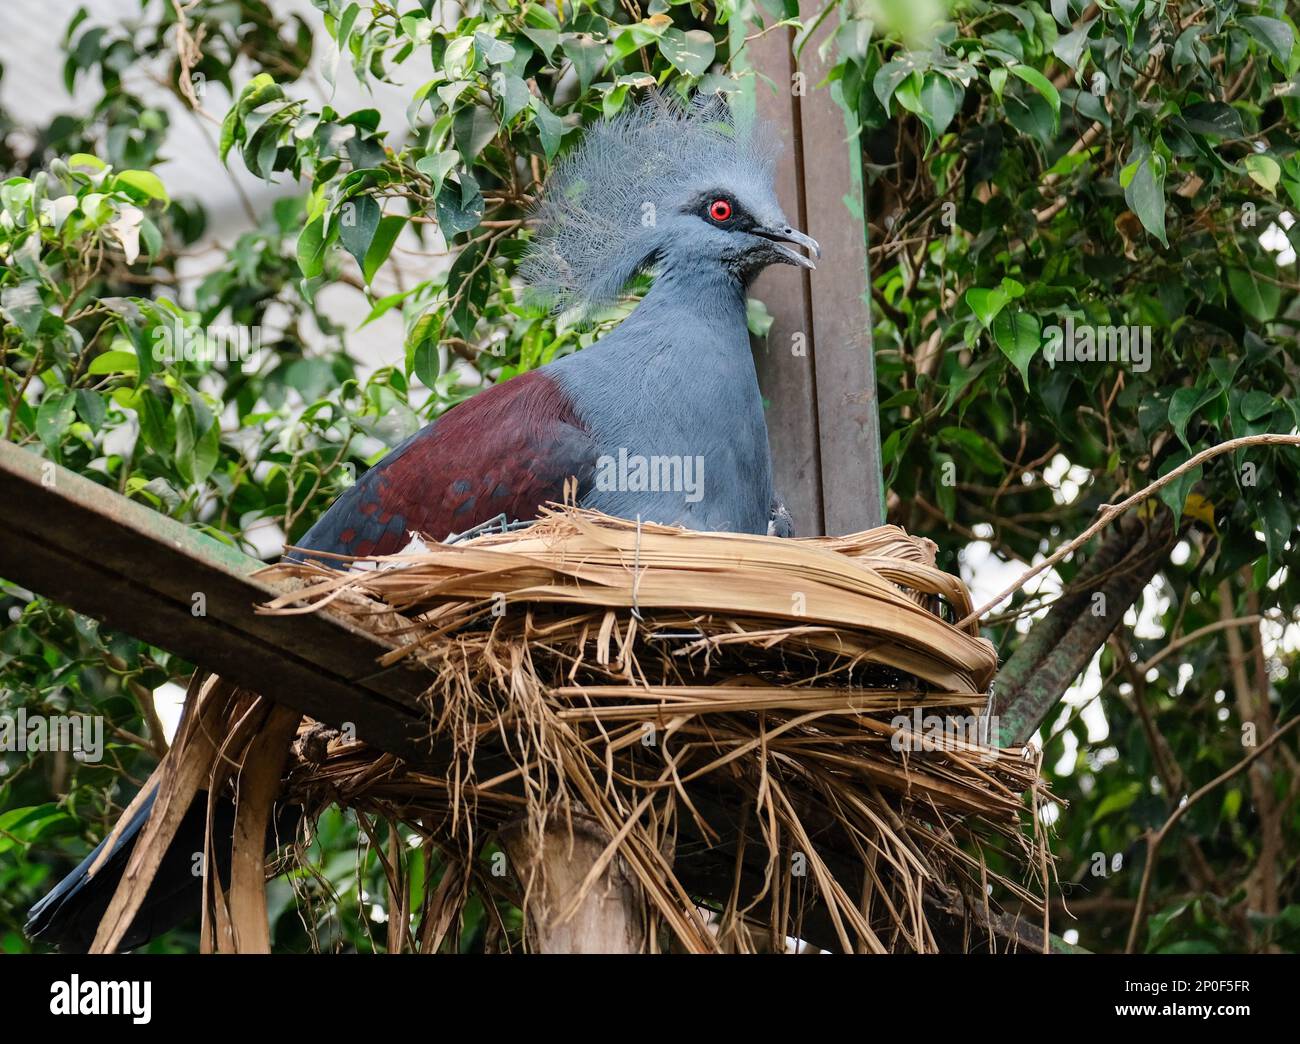 FUENGIROLA, ANDALUCIA/SPAIN - JULY 4 : Southern Crowned Pigeon (Goura scheepmakeri sclateri) at the Bioparc Fuengirola Costa del Sol Spain on July 4 Stock Photo